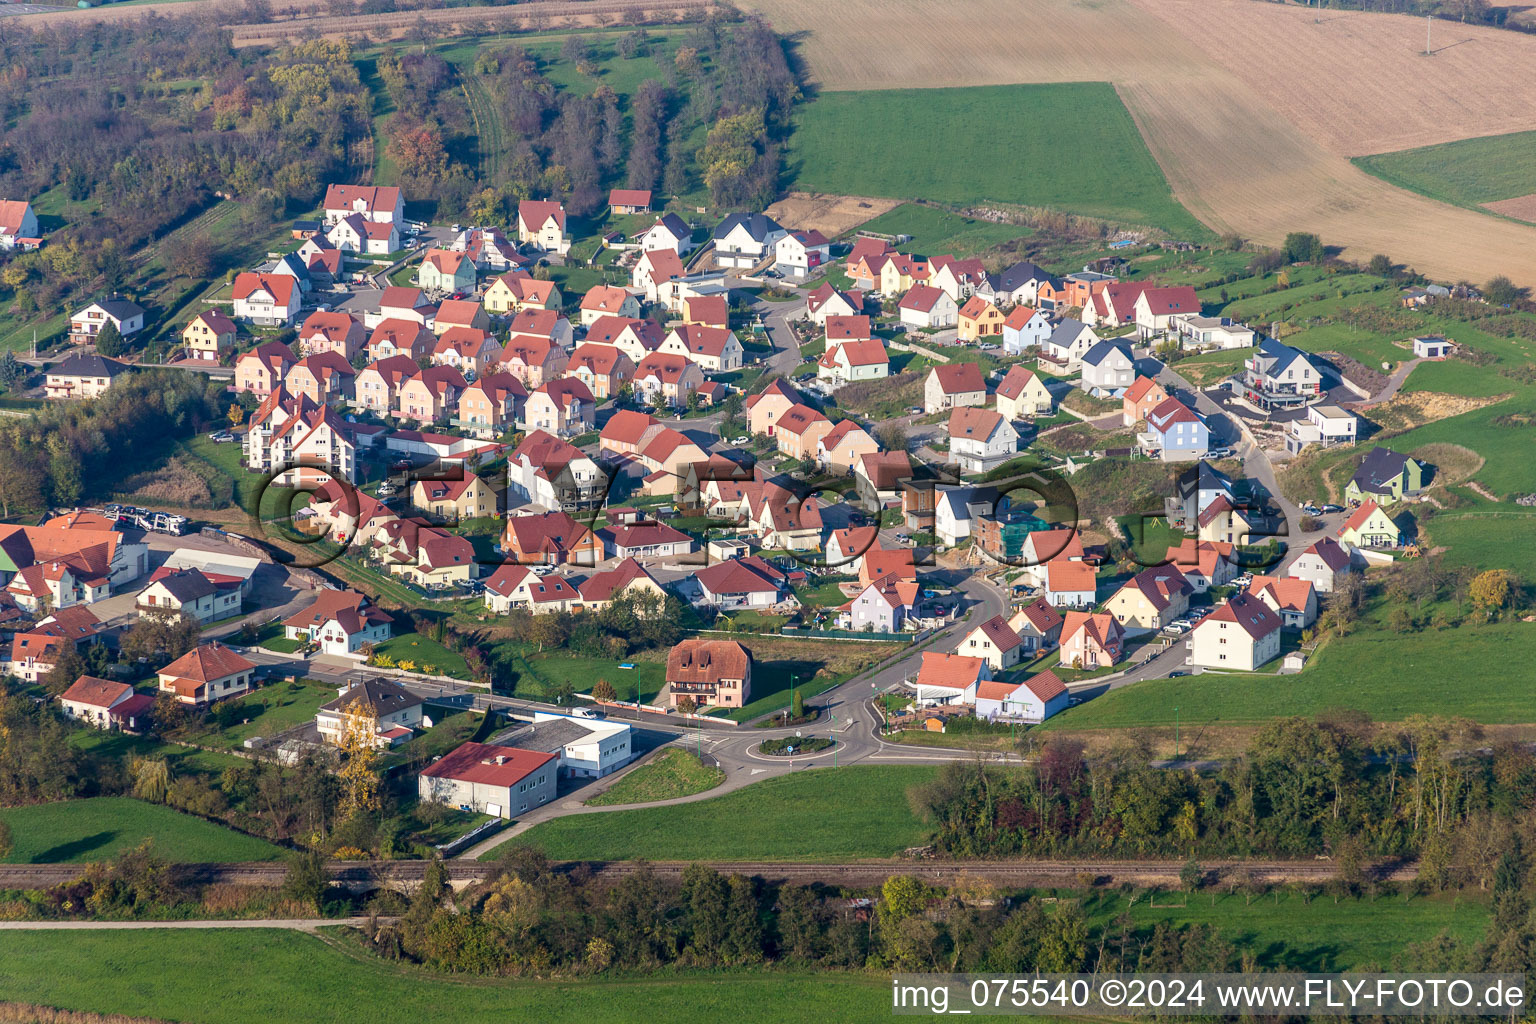 Town View of the streets and houses of the residential areas in Soultz-sous-Forets in Grand Est, France